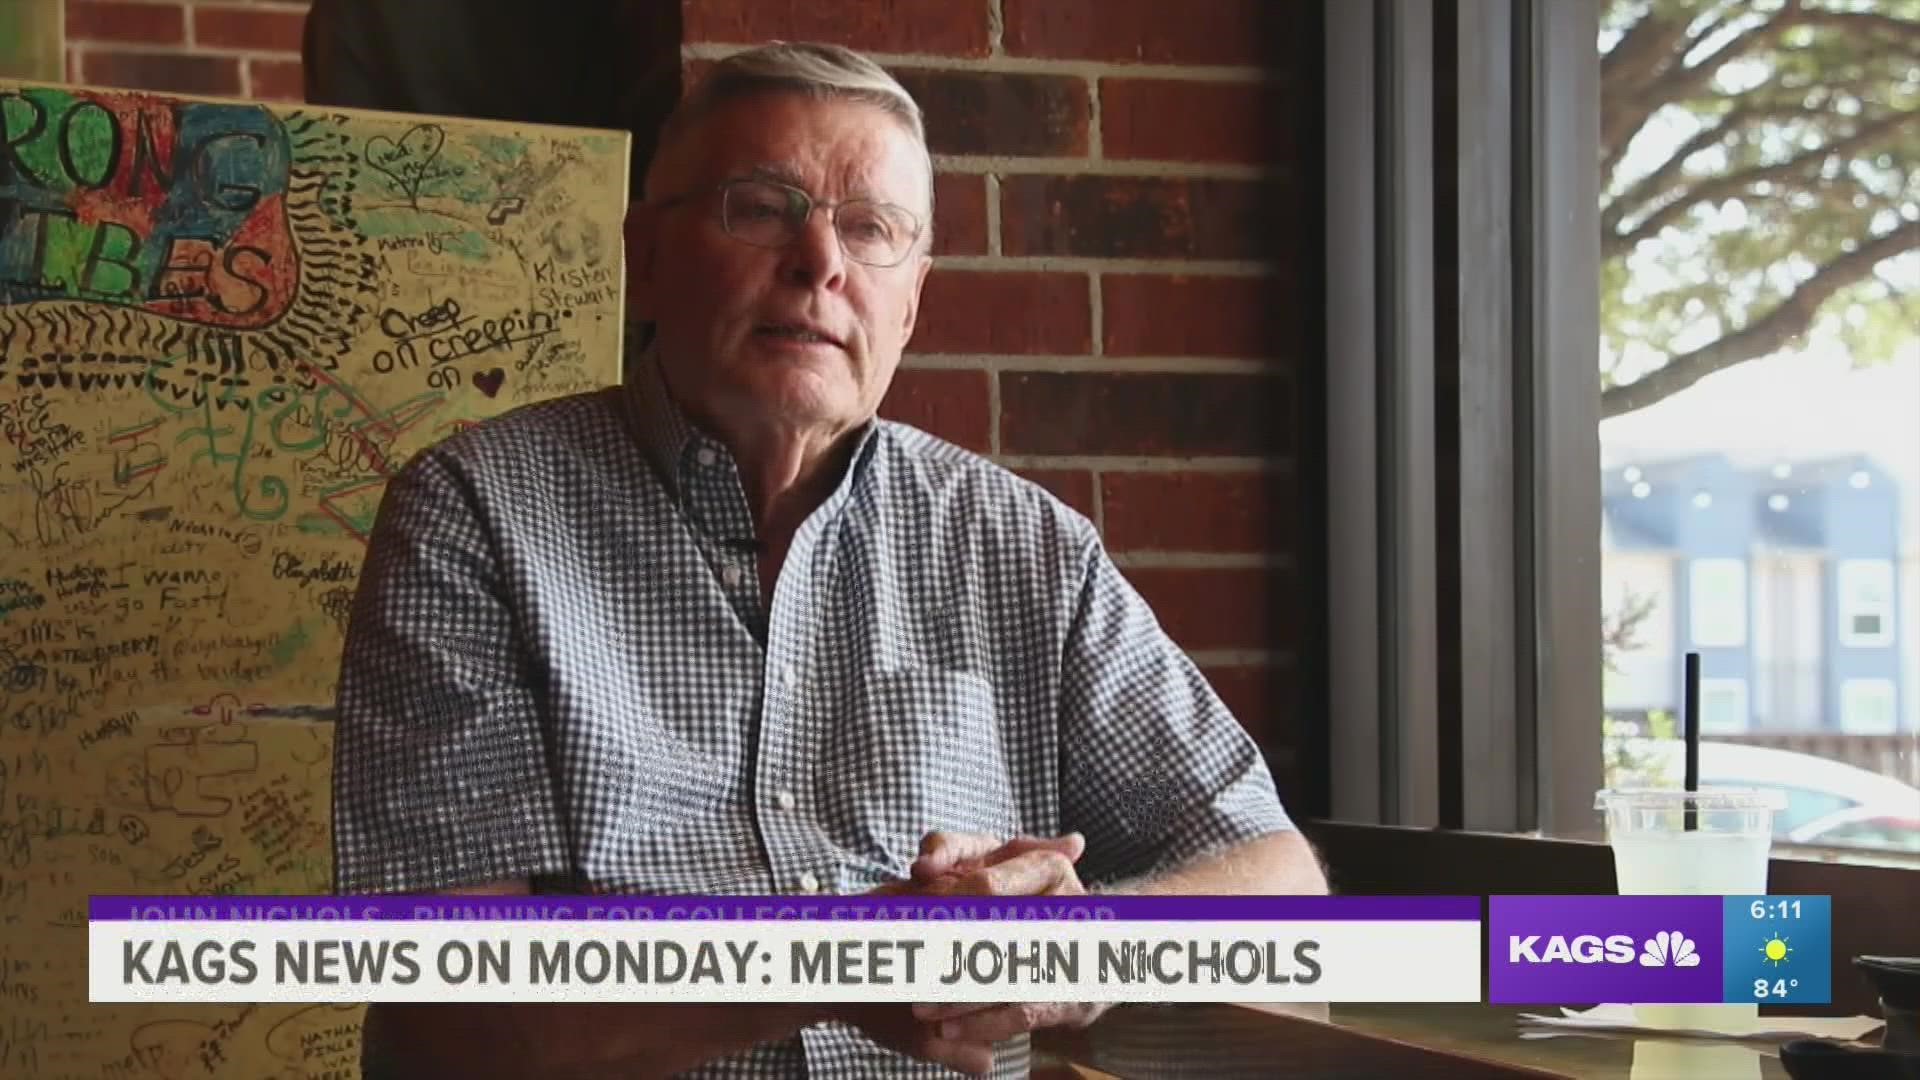 Each weekday during October starting on Mon, Oct. 3, KAGS TV's William Johnson will be sitting down with candidates at local coffee shops ahead of November.